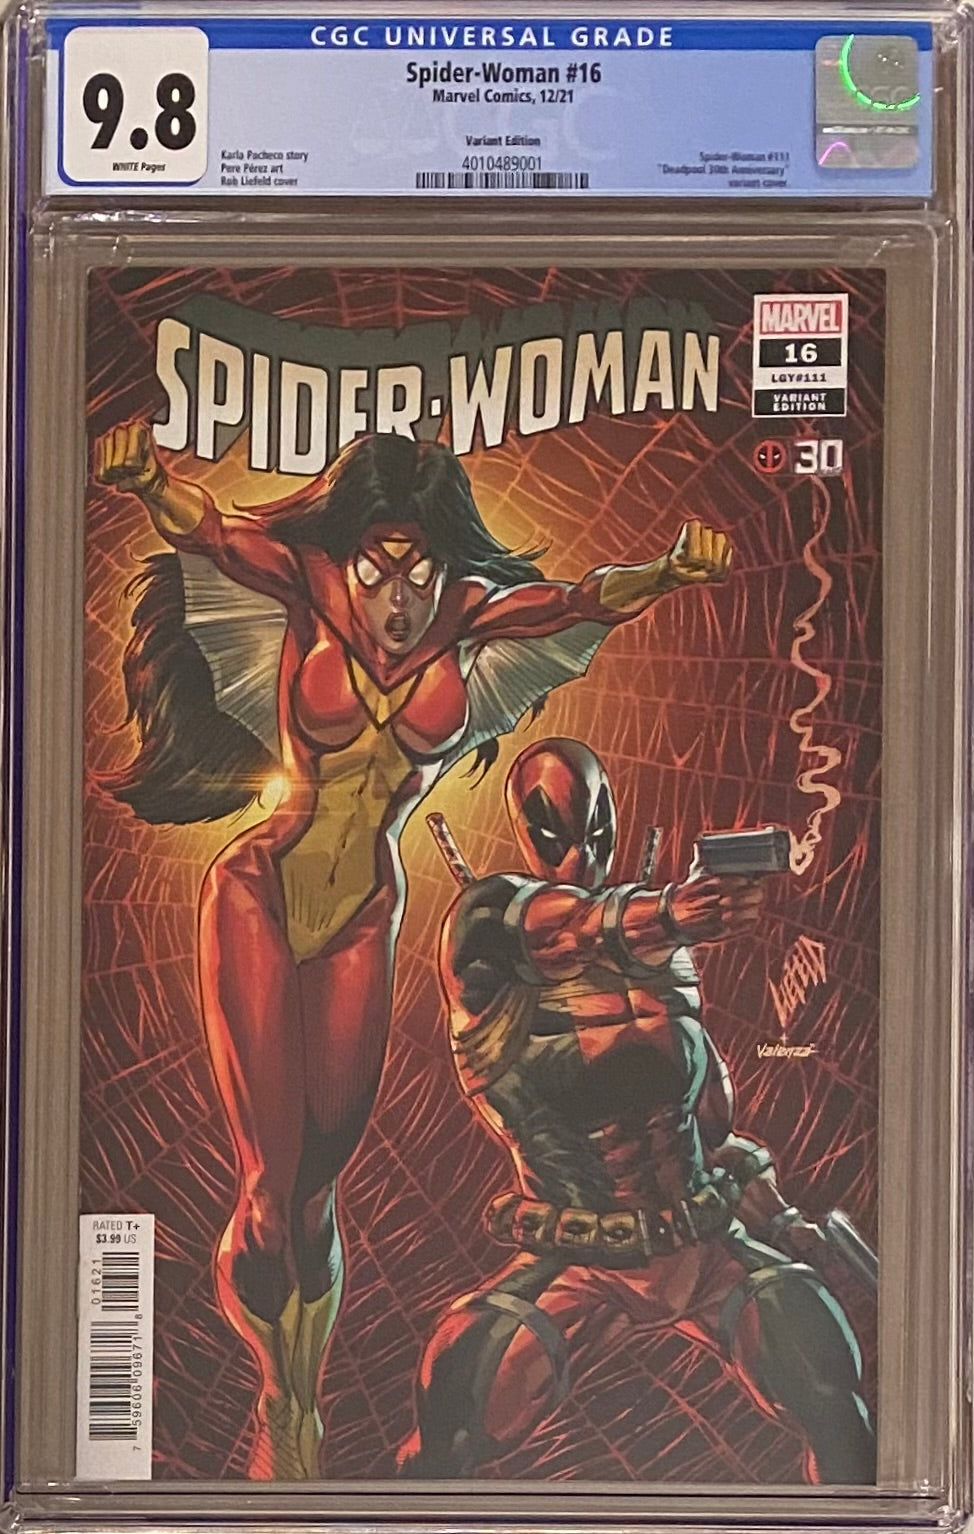 Spider-Woman #16 Liefeld Deadpool 30th Anniversary Variant CGC 9.8